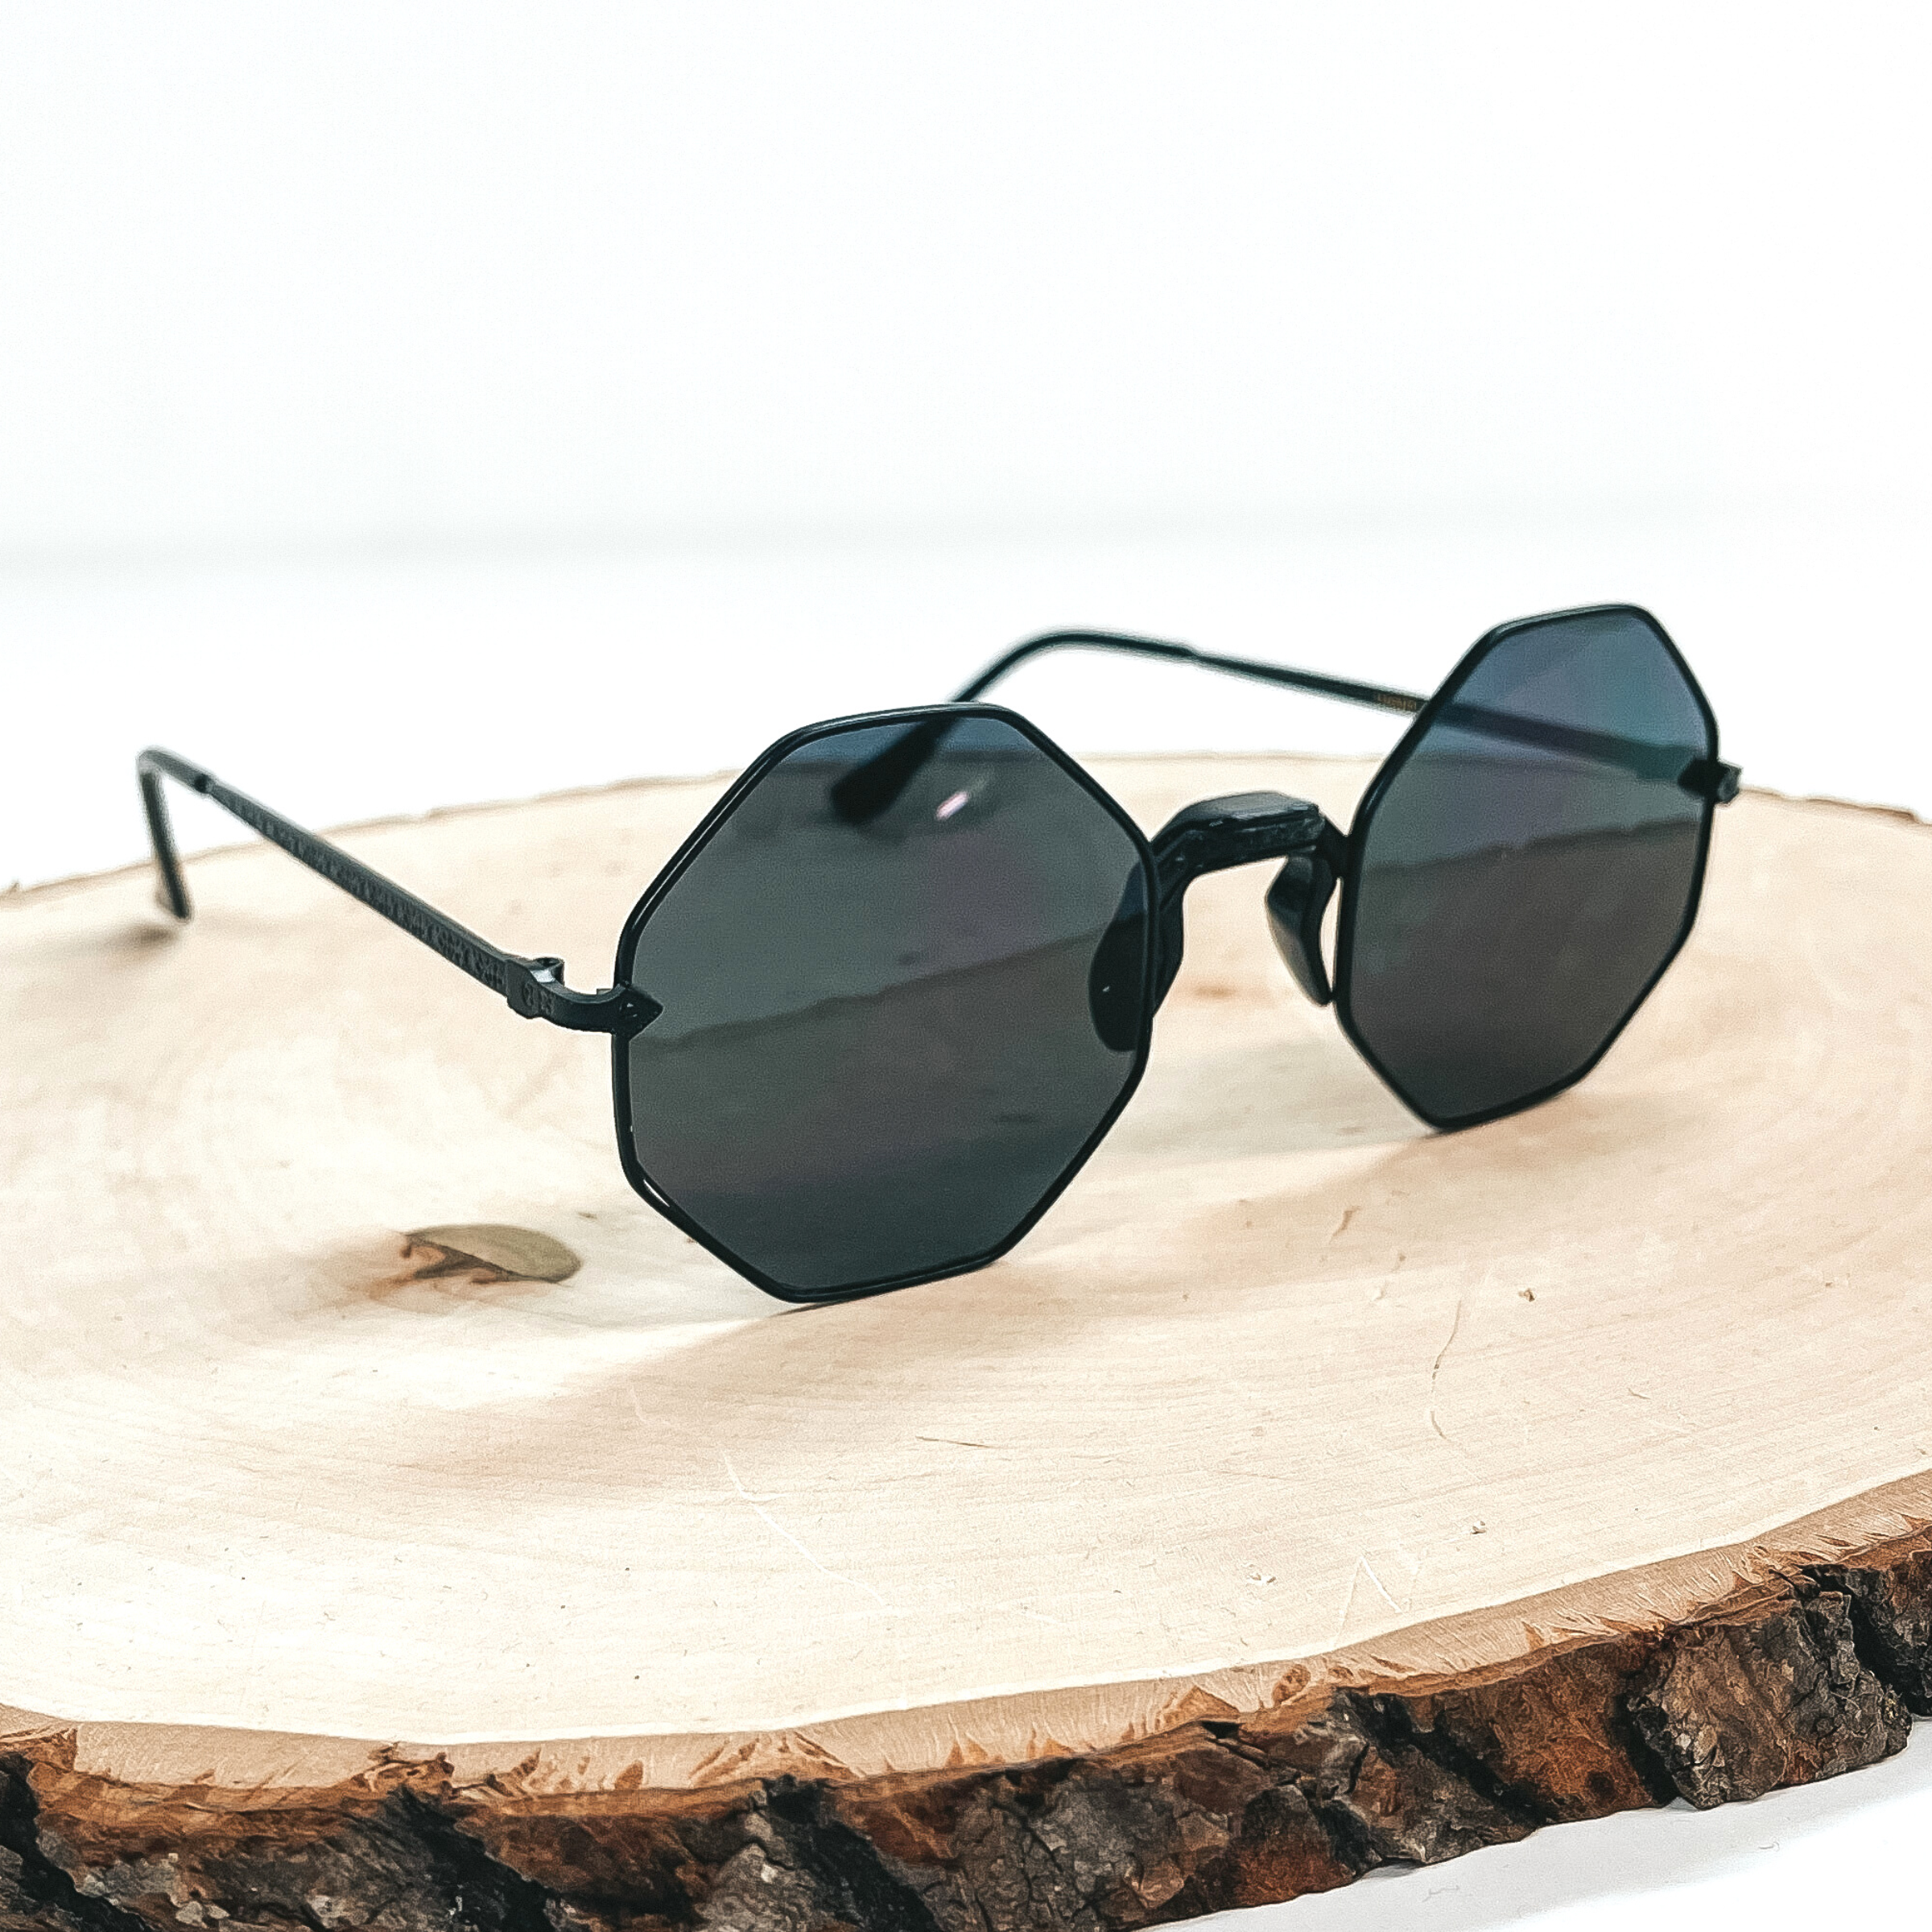 This is a pair of black octagon sunglasses, the lense is black/dark grey with a  black outline. These pair of sunglasses are taken on a wooden slate and on a white  background.